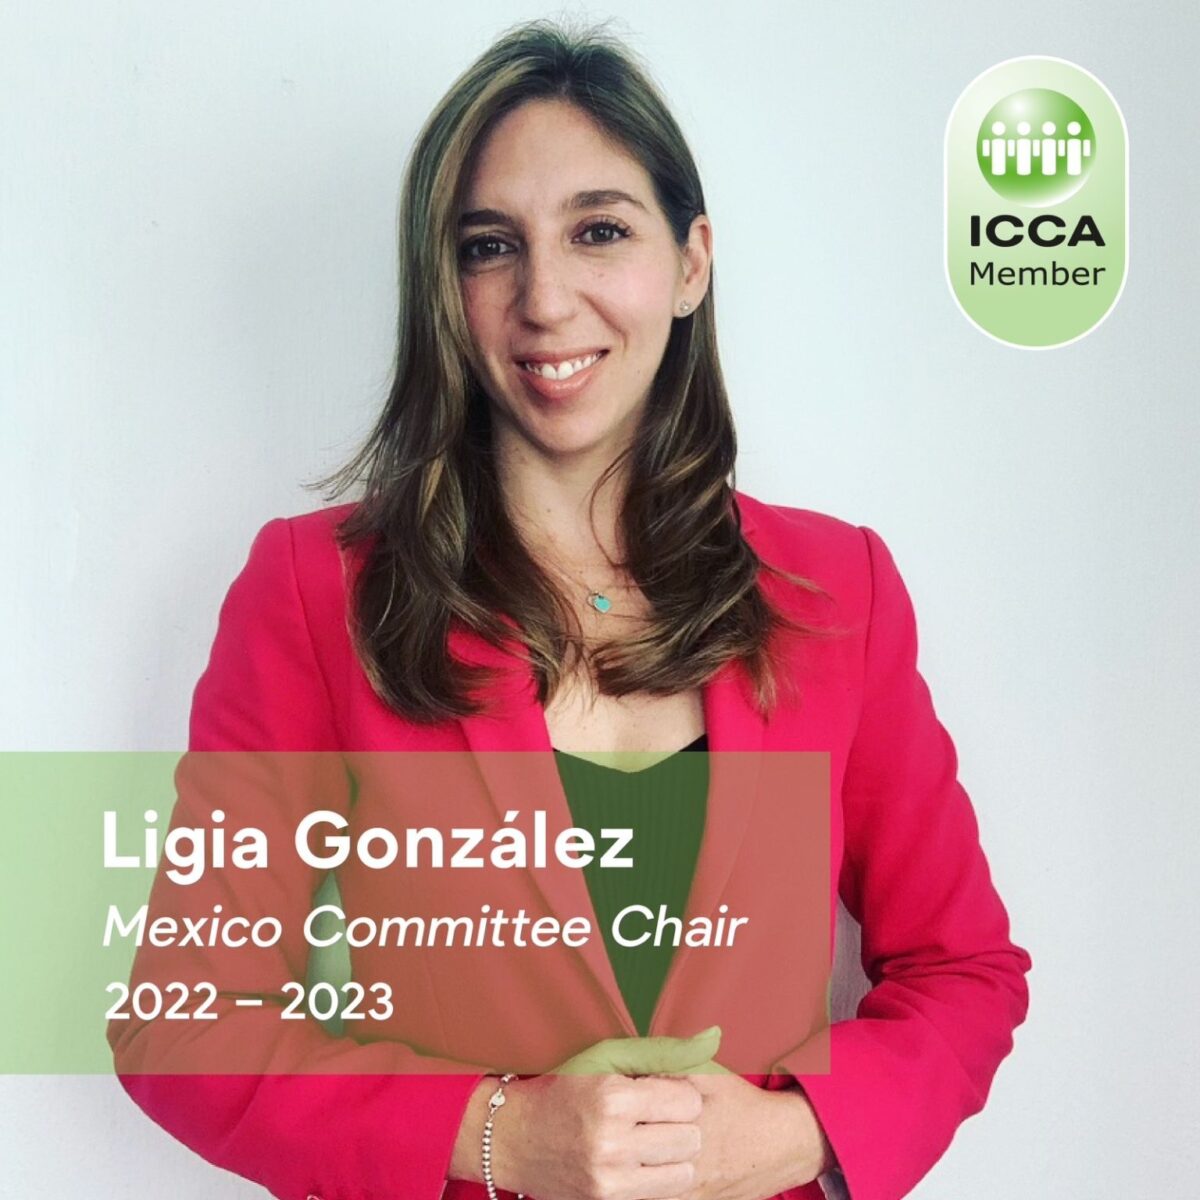 Ligia as Mexico Committee Chair ICCA